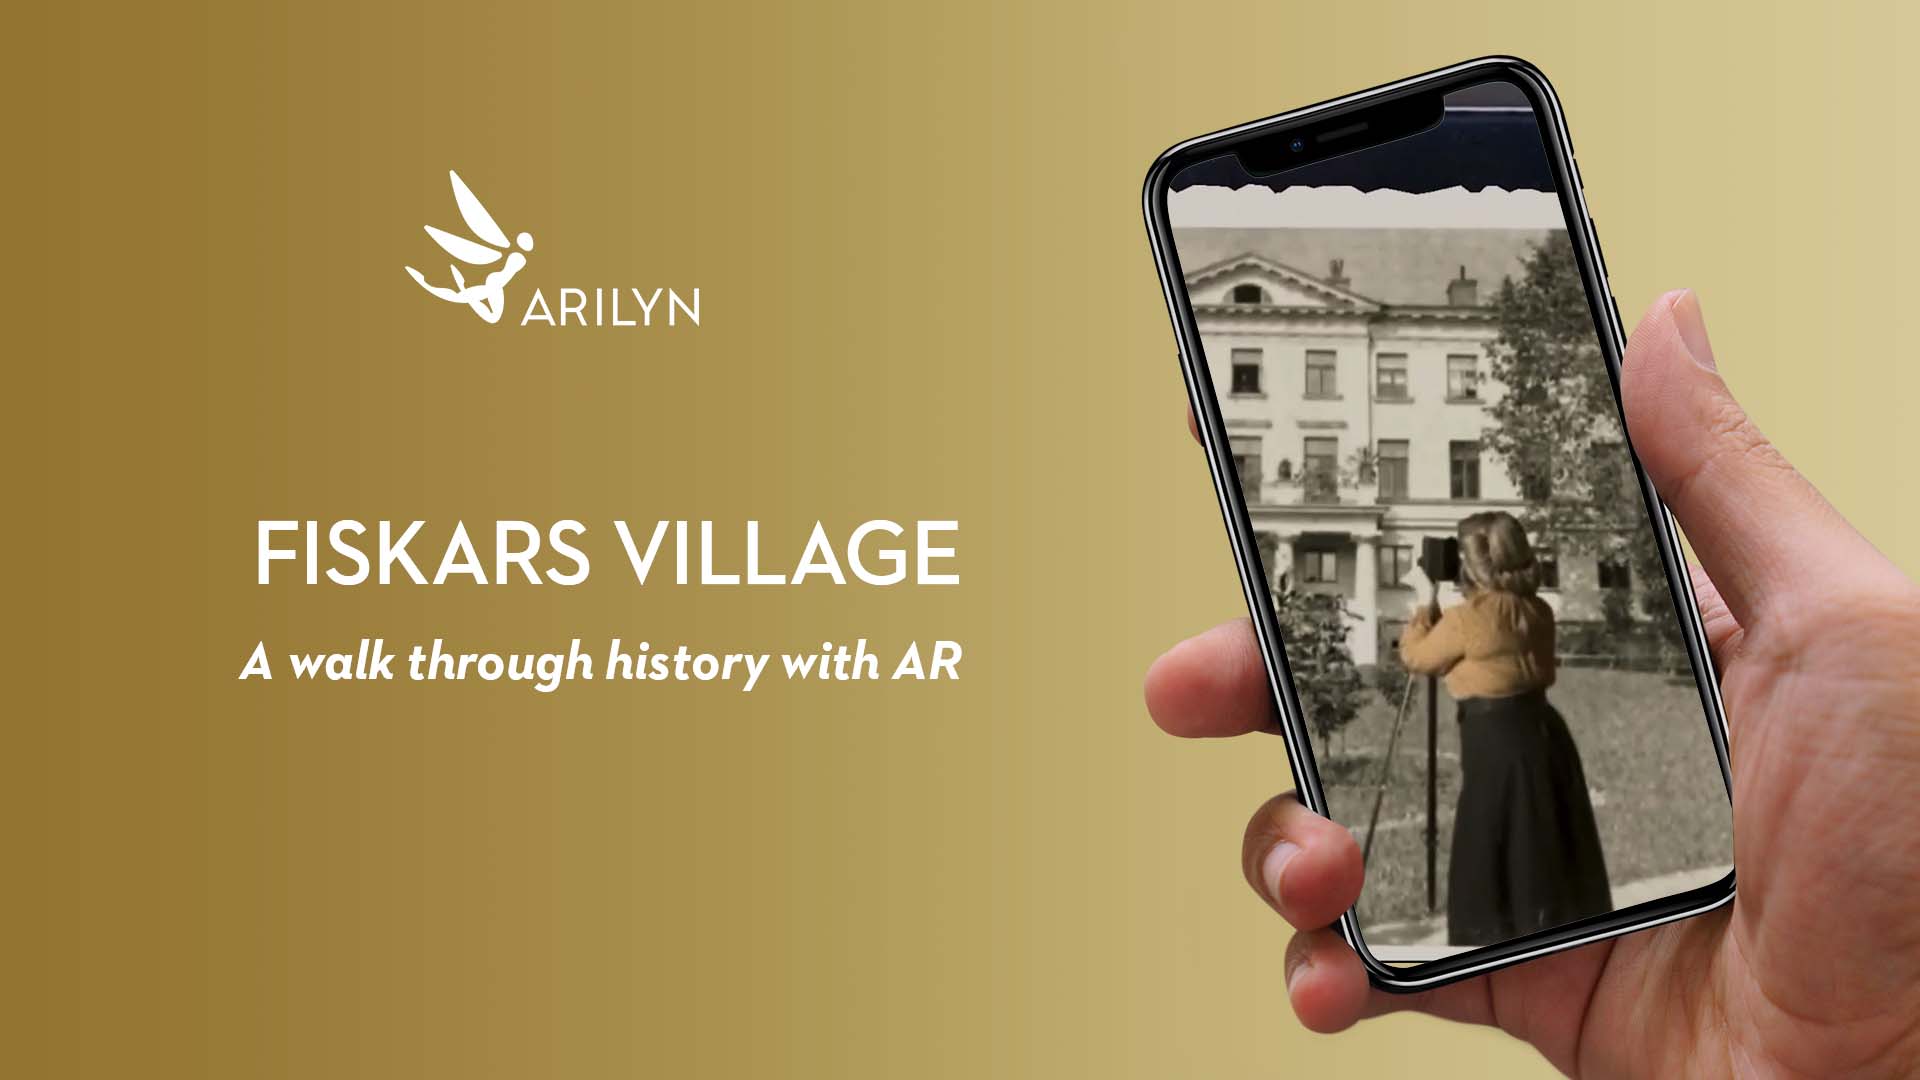 Fiskars Village's history brought into today with AR